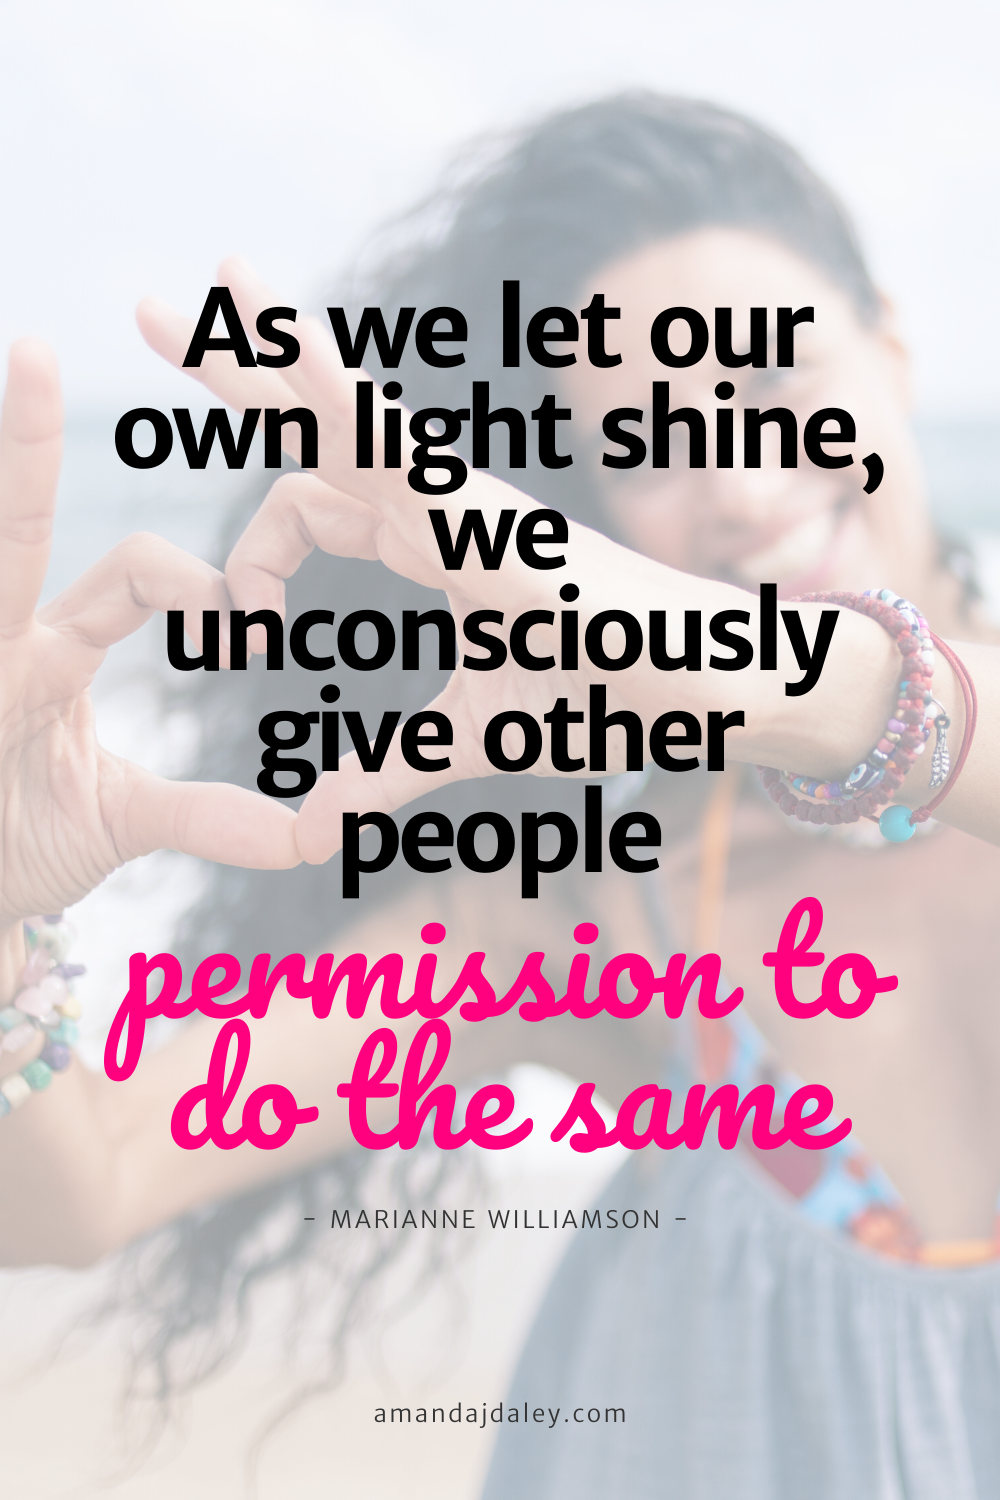 Motivational quote for female entrepreneurs - as we let our own light shine - Marianne Williamson.png